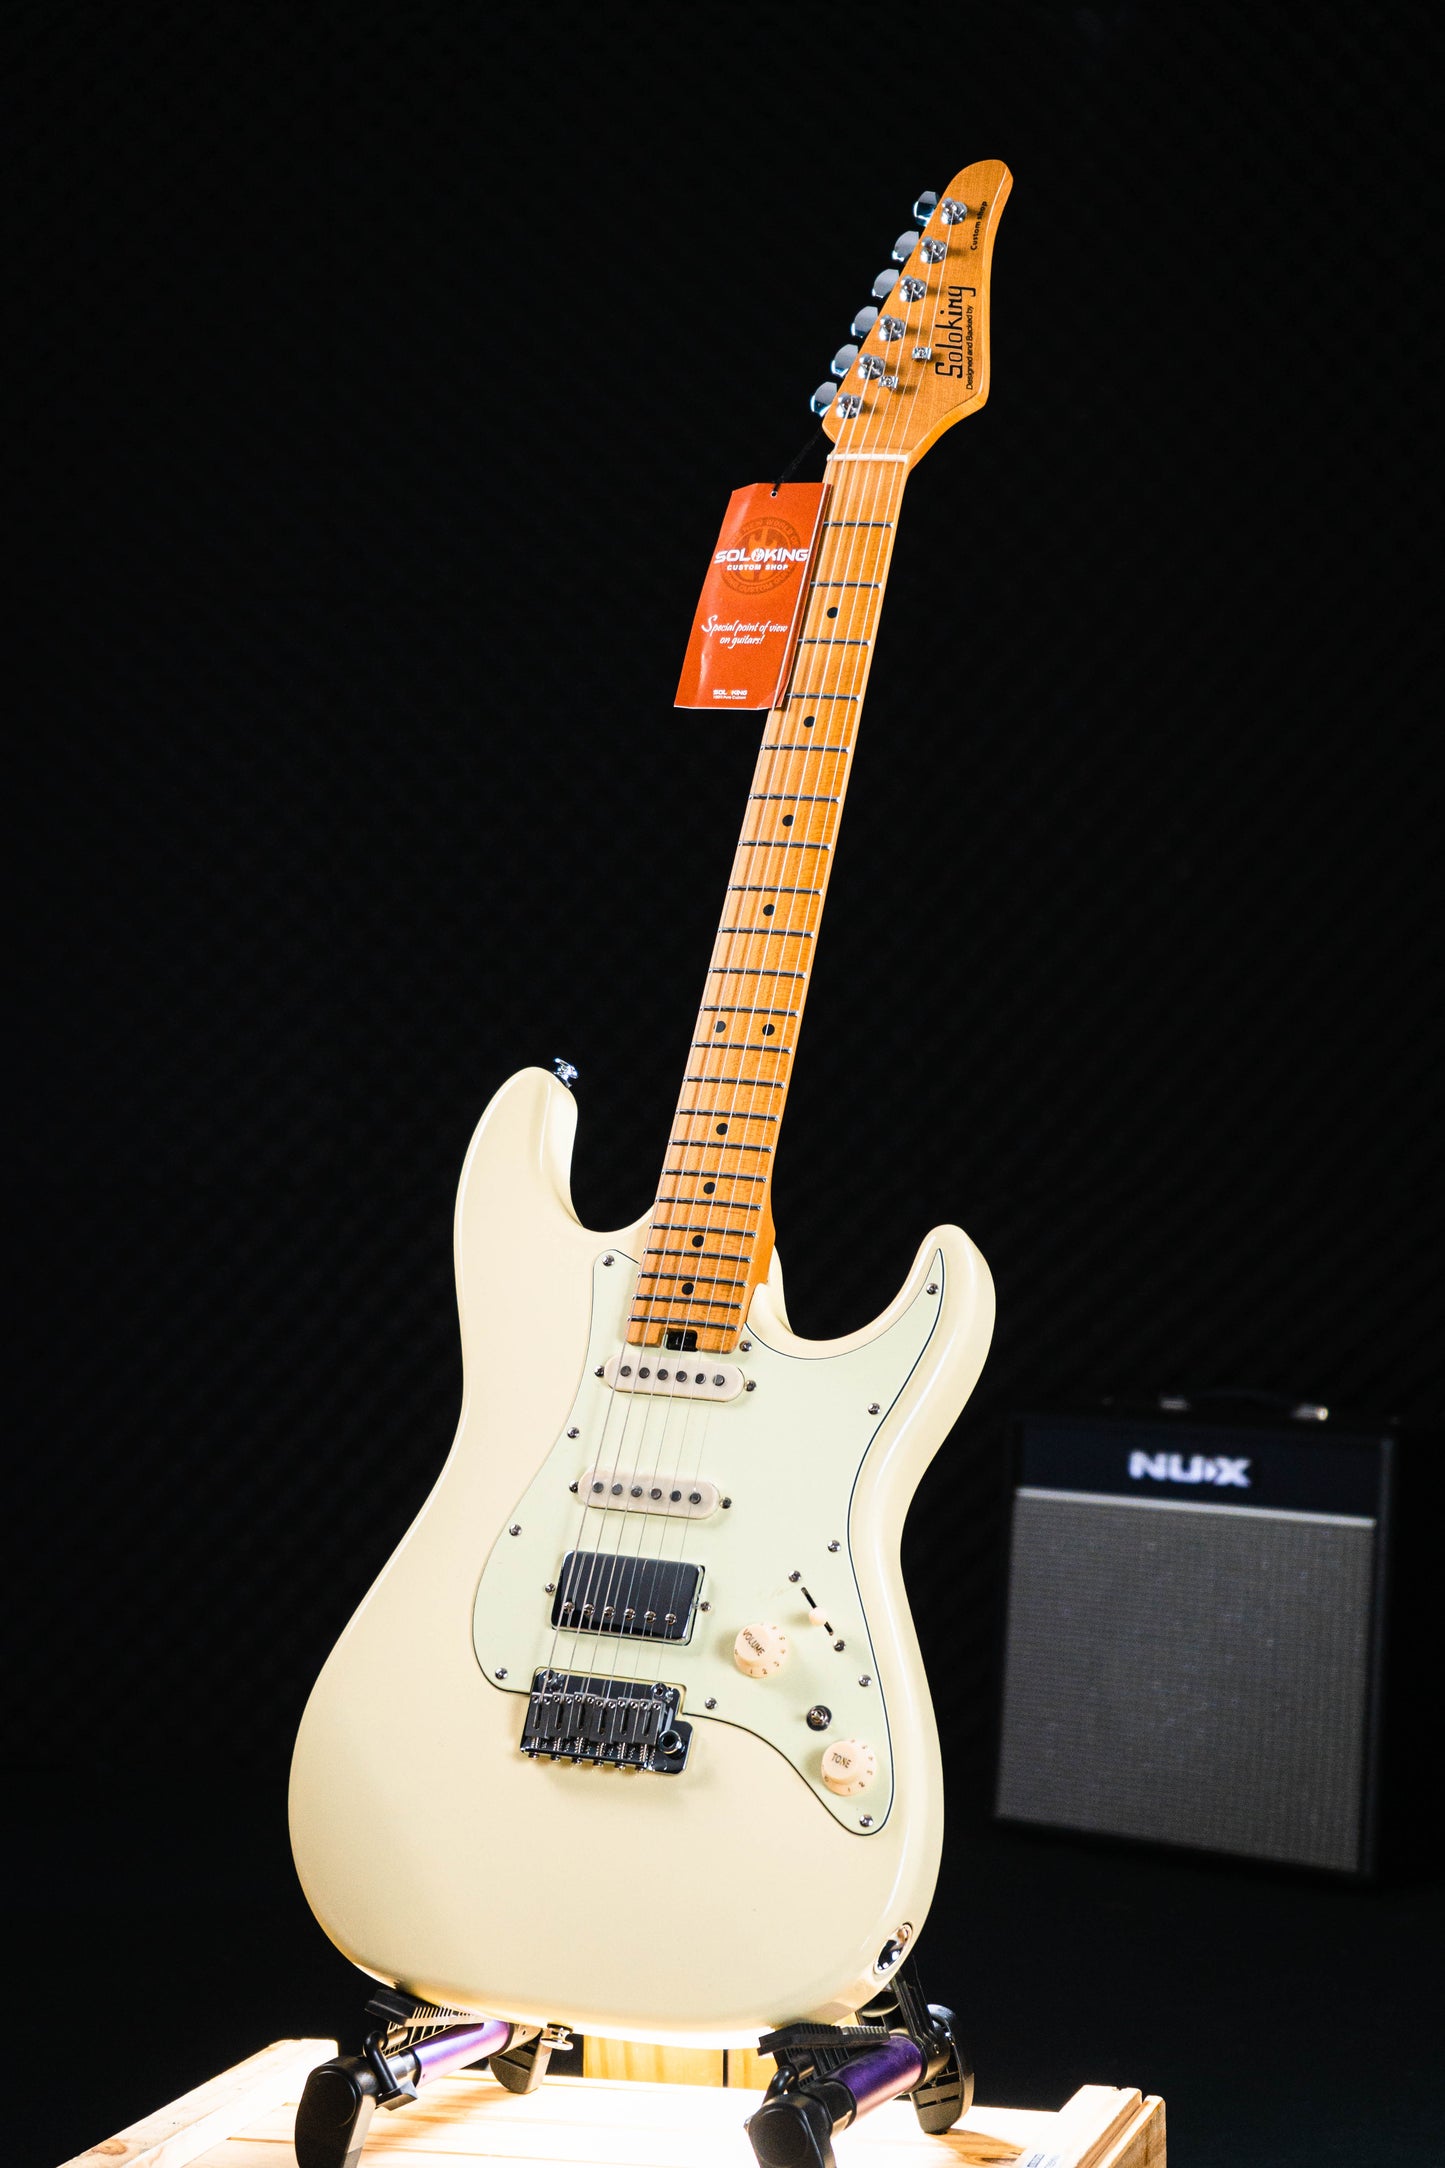 Soloking MS-1 Classic in Vintage White with Roasted Maple Neck and FB